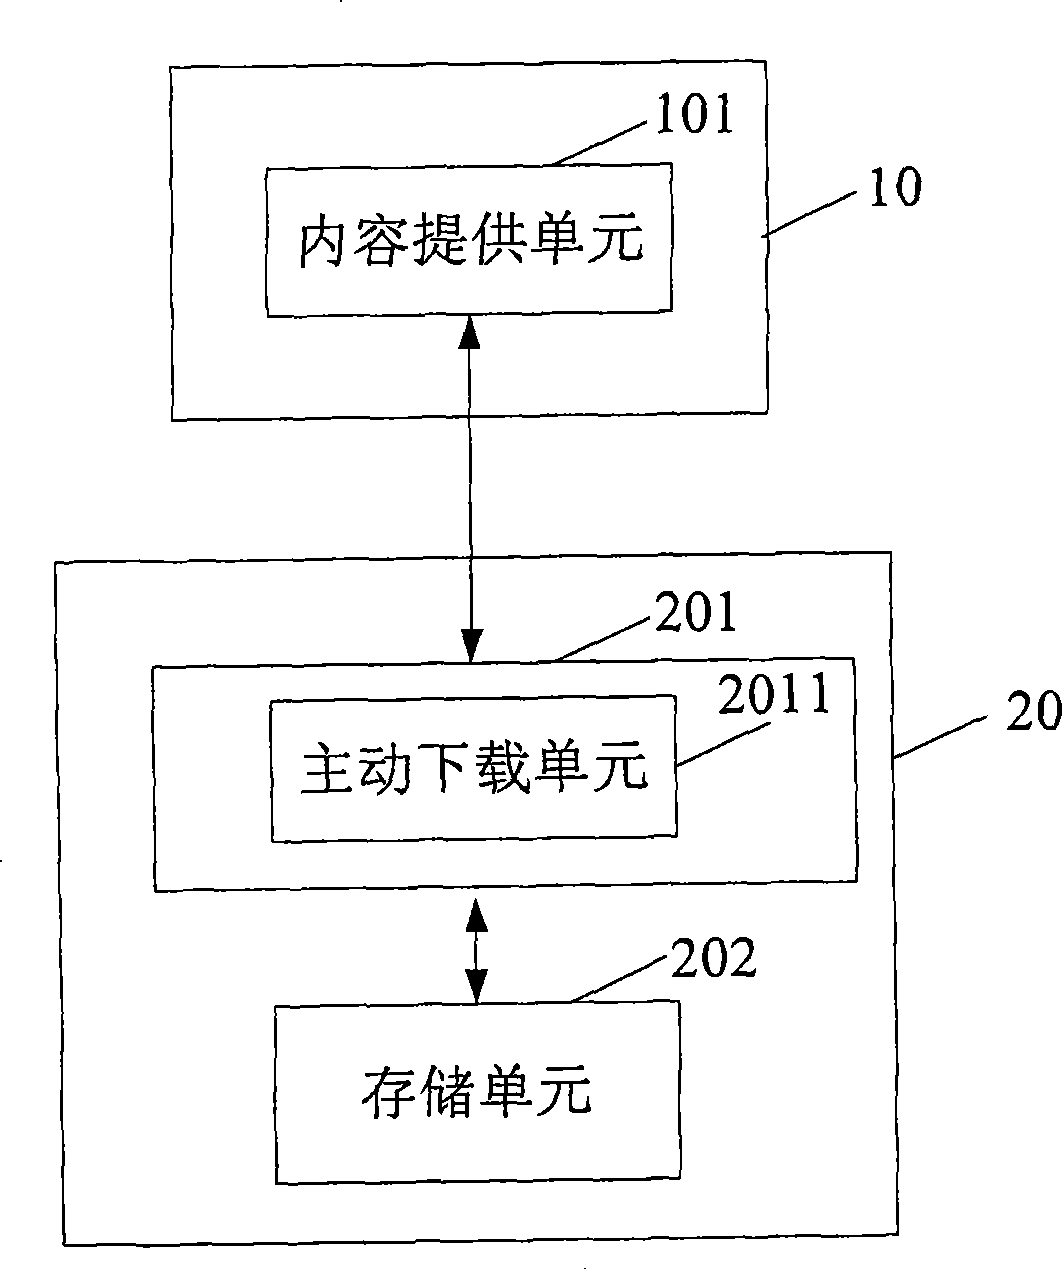 Video multimedia message processing method based on wireless terminal, system and wireless terminal thereof